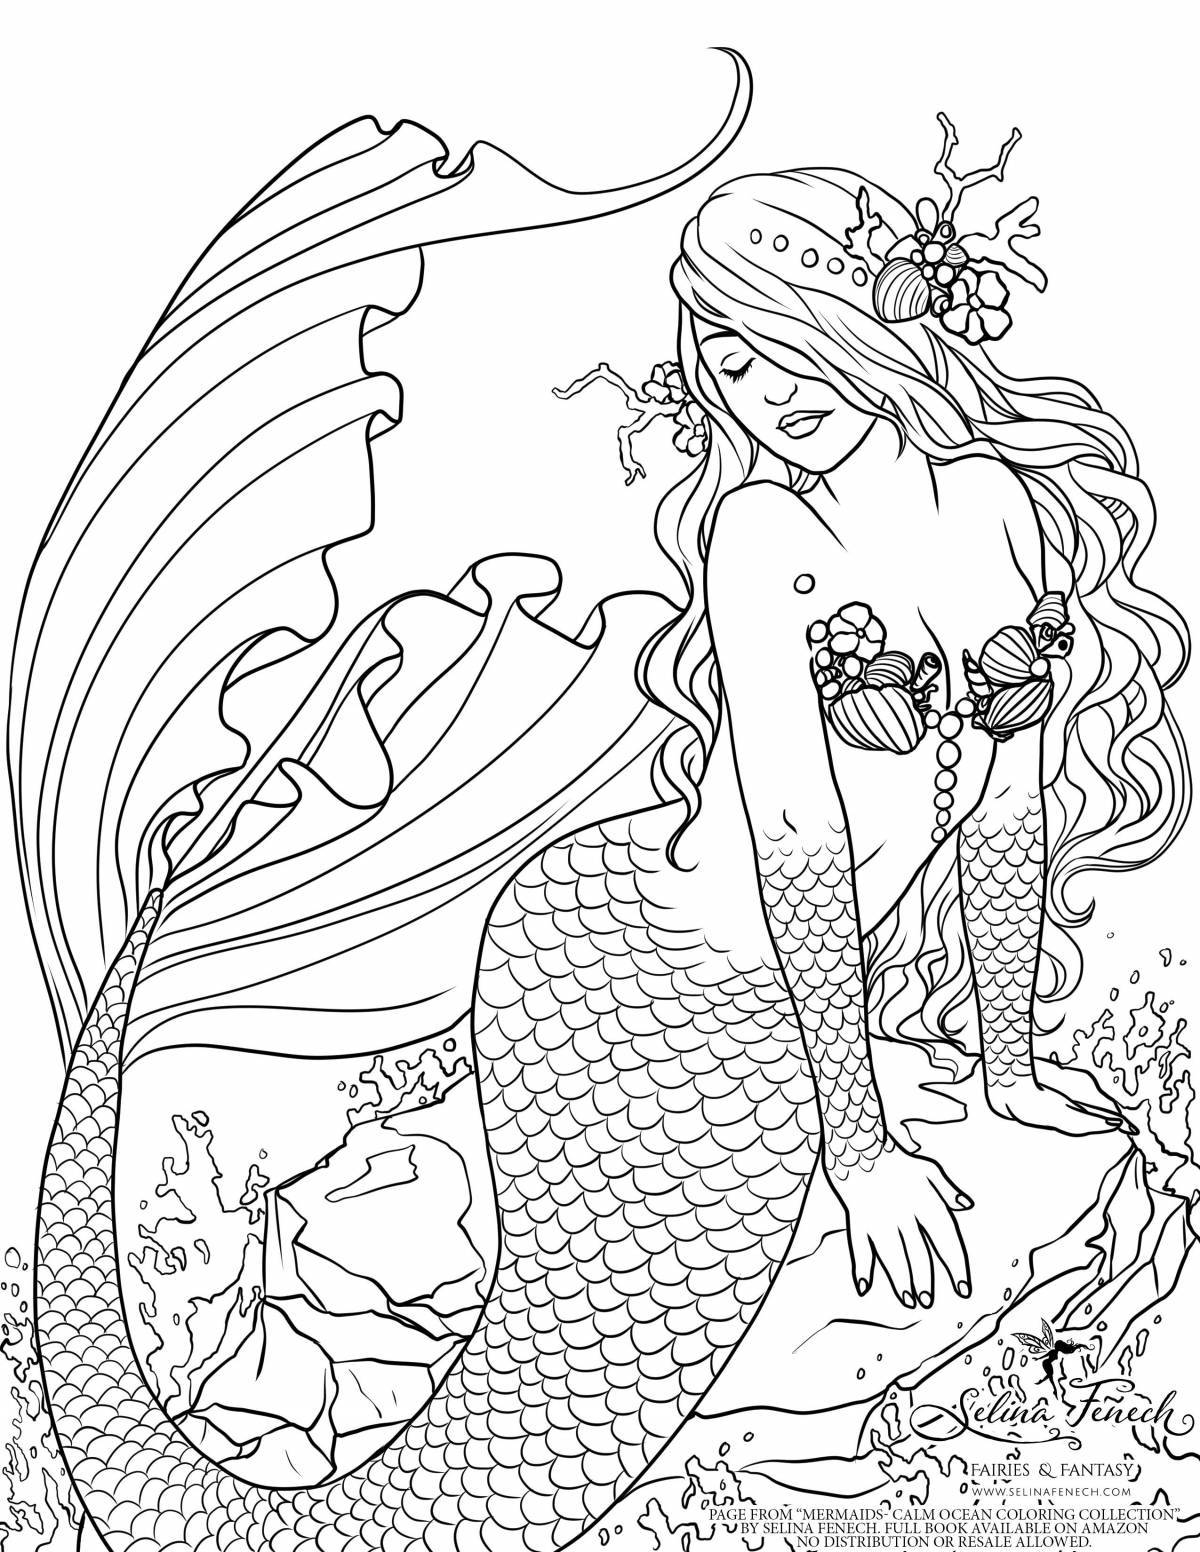 Glitter mermaid coloring book for girls